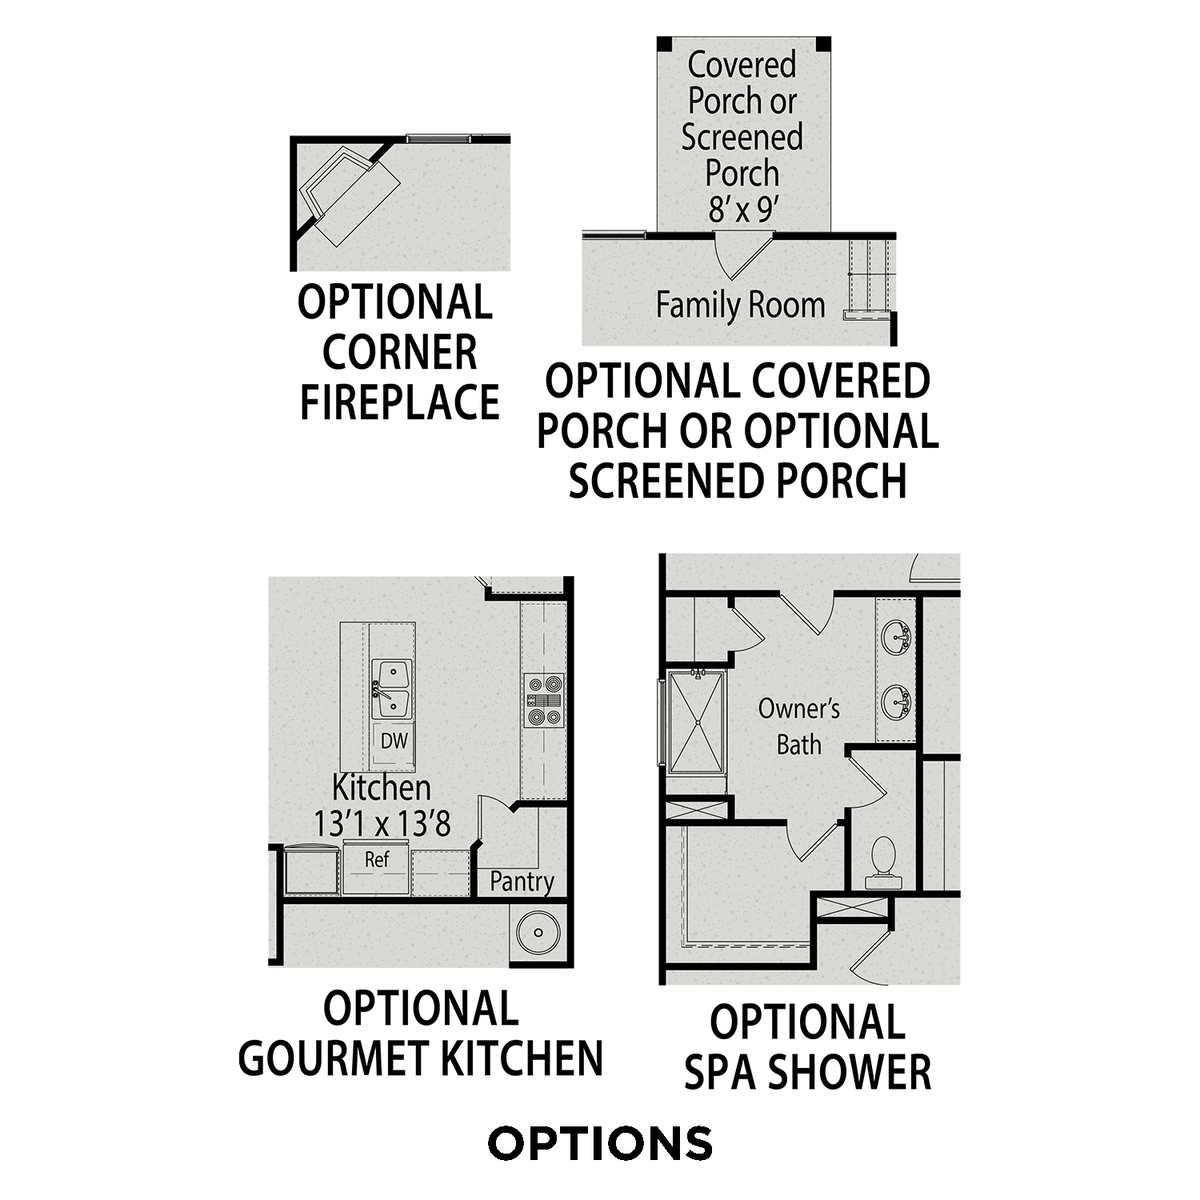 3 - The Durham floor plan layout for 21 Fairwinds Drive in Davidson Homes' Gregory Village community.